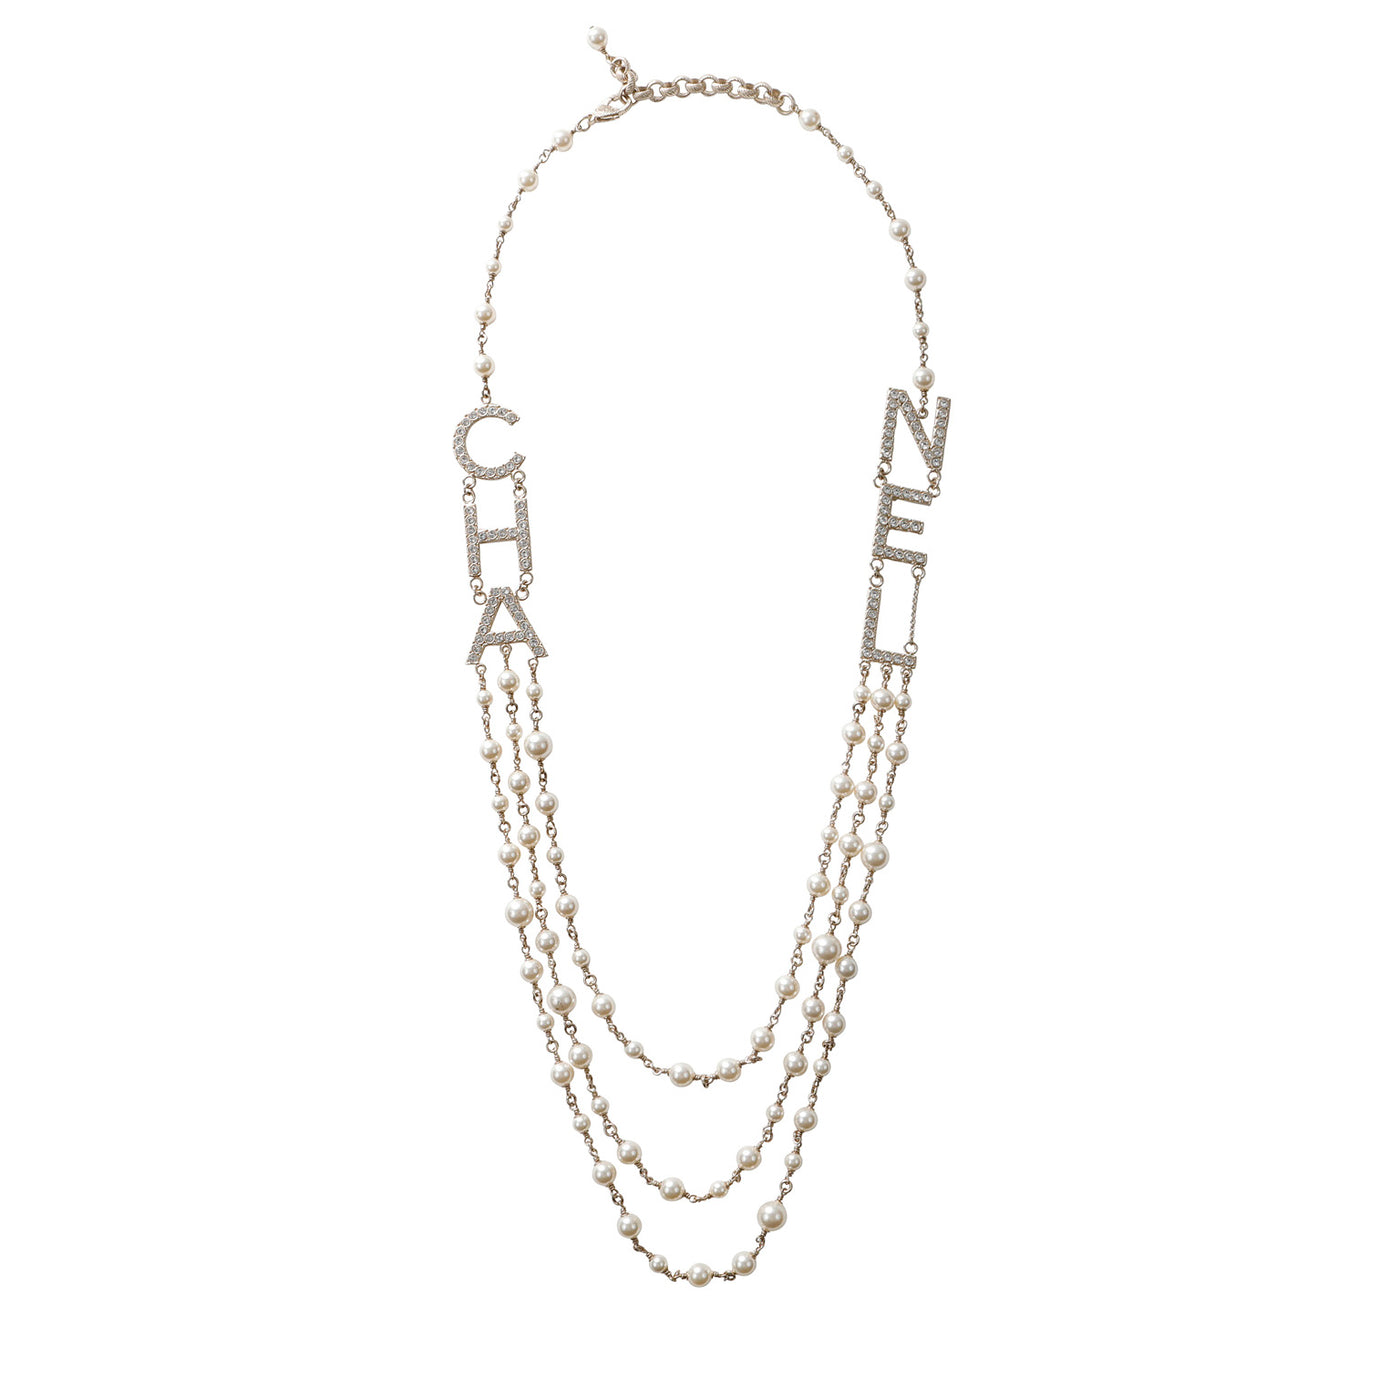 Chanel Crystal & Pearl 3 Layer Chain Silver Necklace